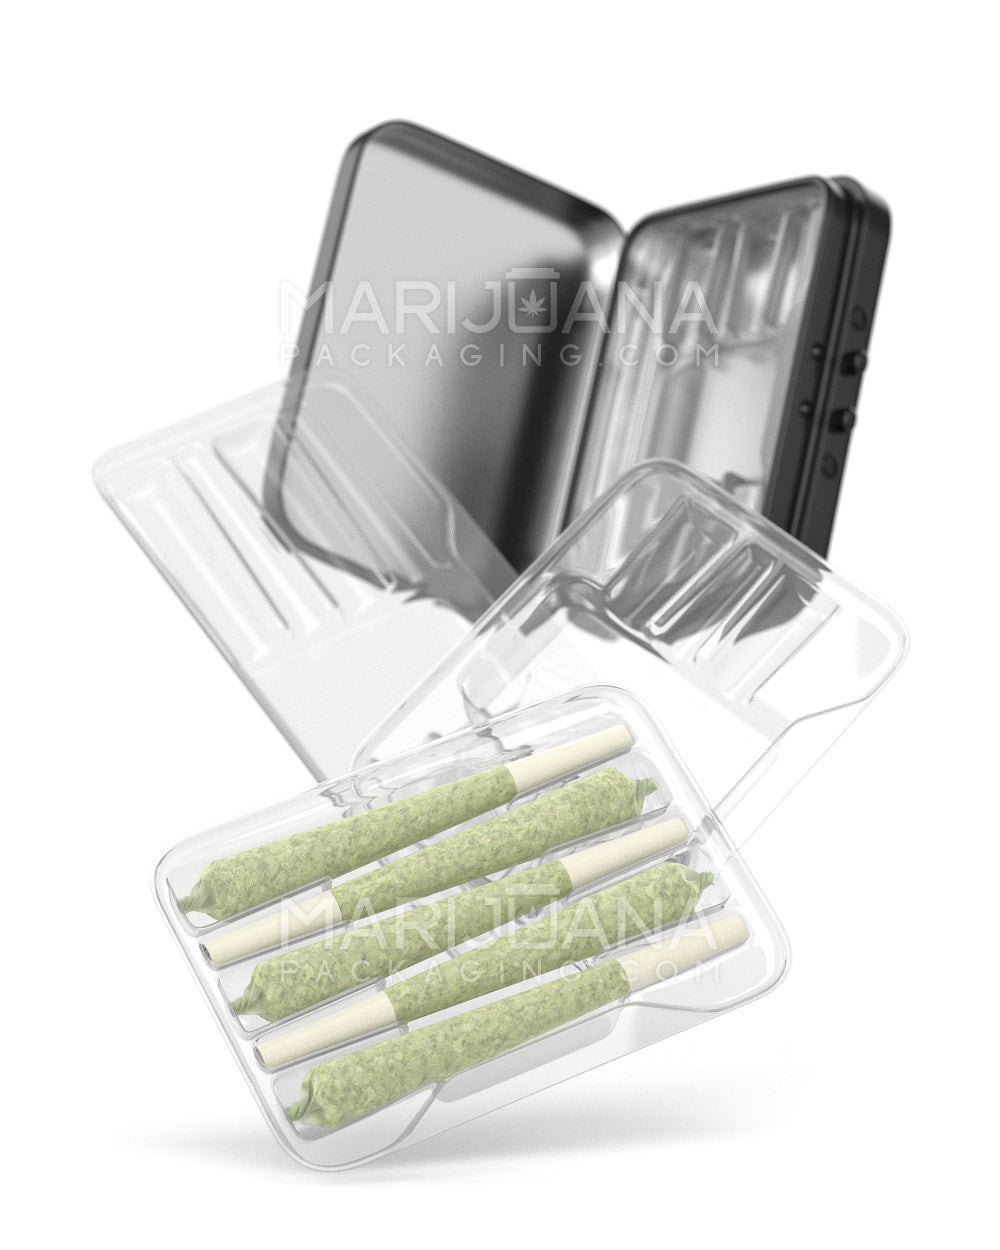 Joint Box Insert Tray for 70mm Mini Size Pre Rolled Joints